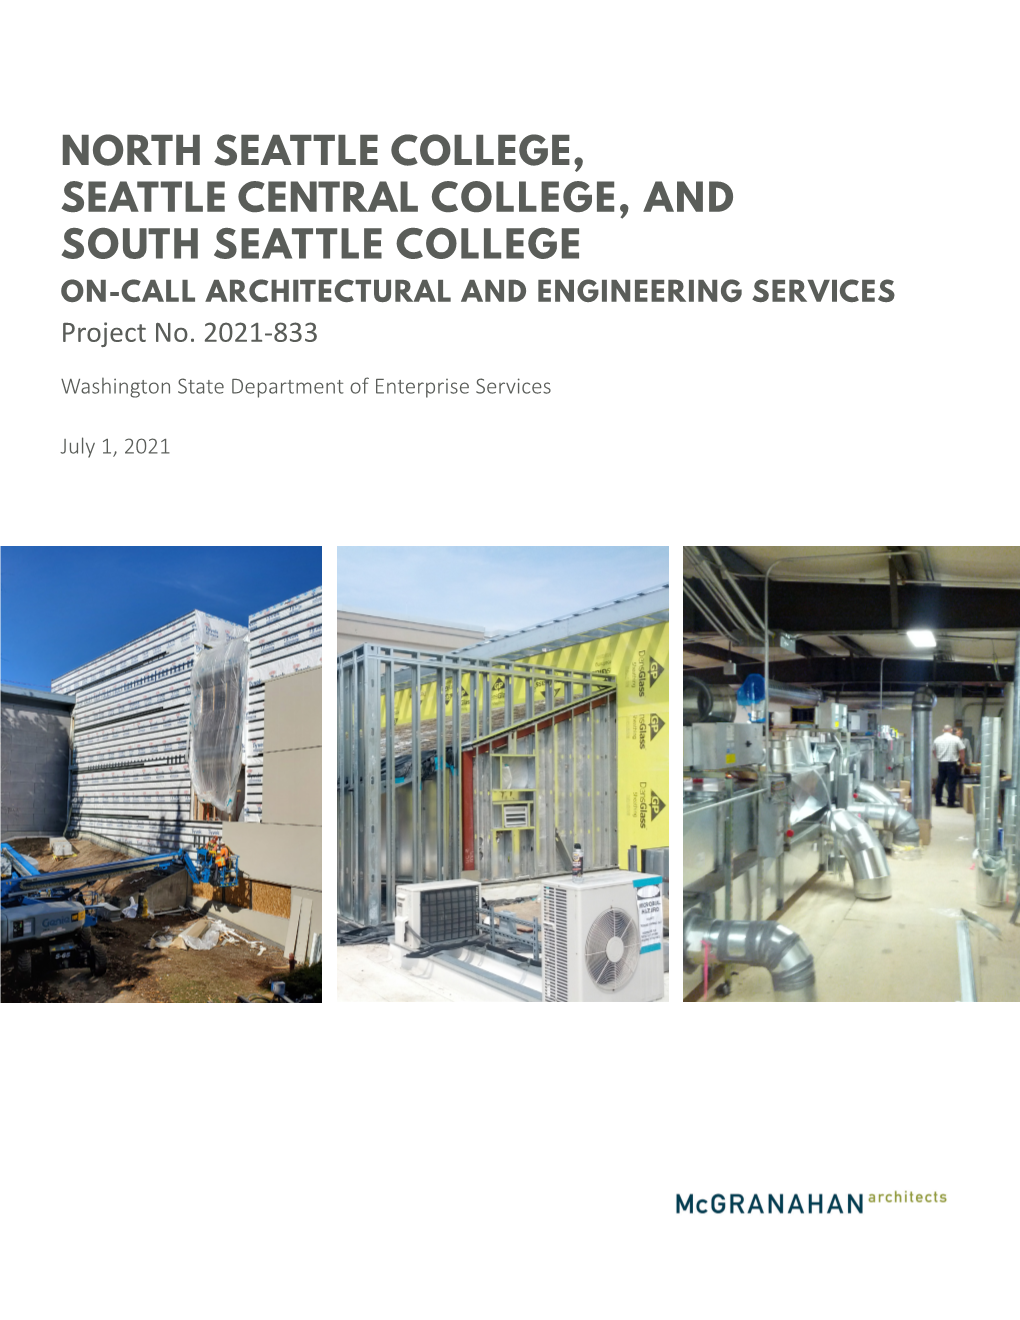 NORTH SEATTLE COLLEGE, SEATTLE CENTRAL COLLEGE, and SOUTH SEATTLE COLLEGE ON-CALL ARCHITECTURAL and ENGINEERING SERVICES Project No